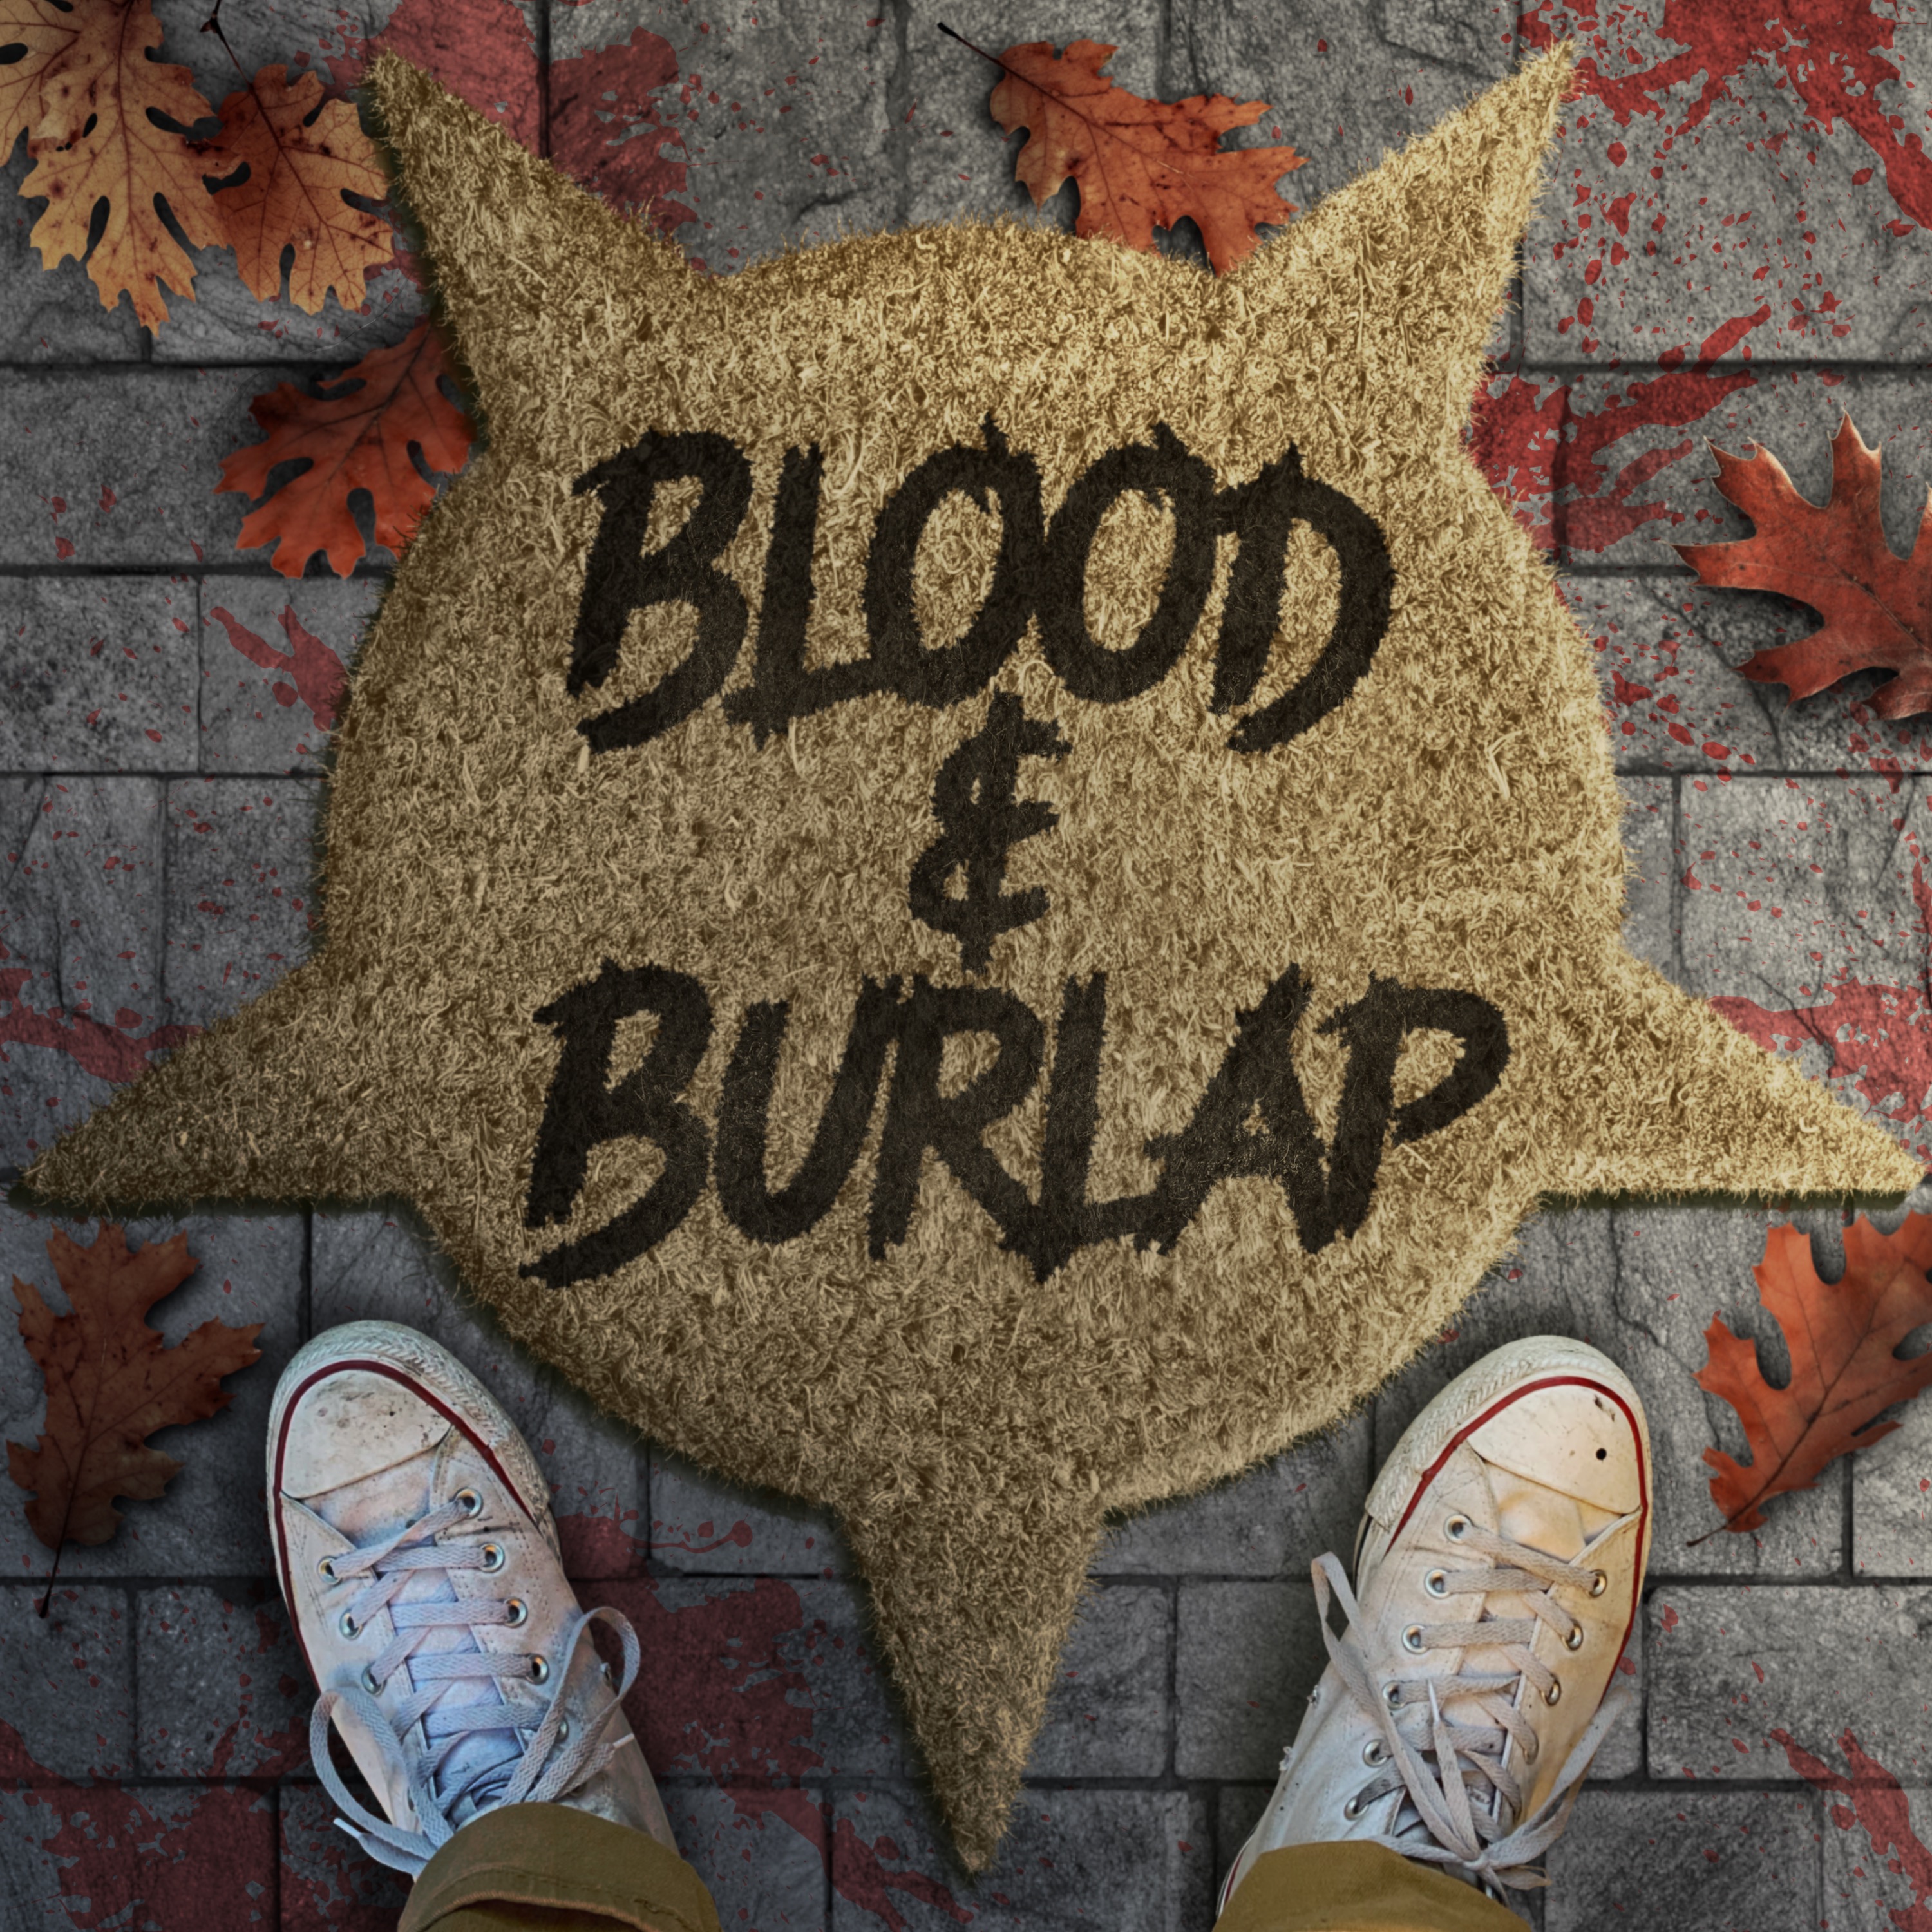 Blood and Burlap